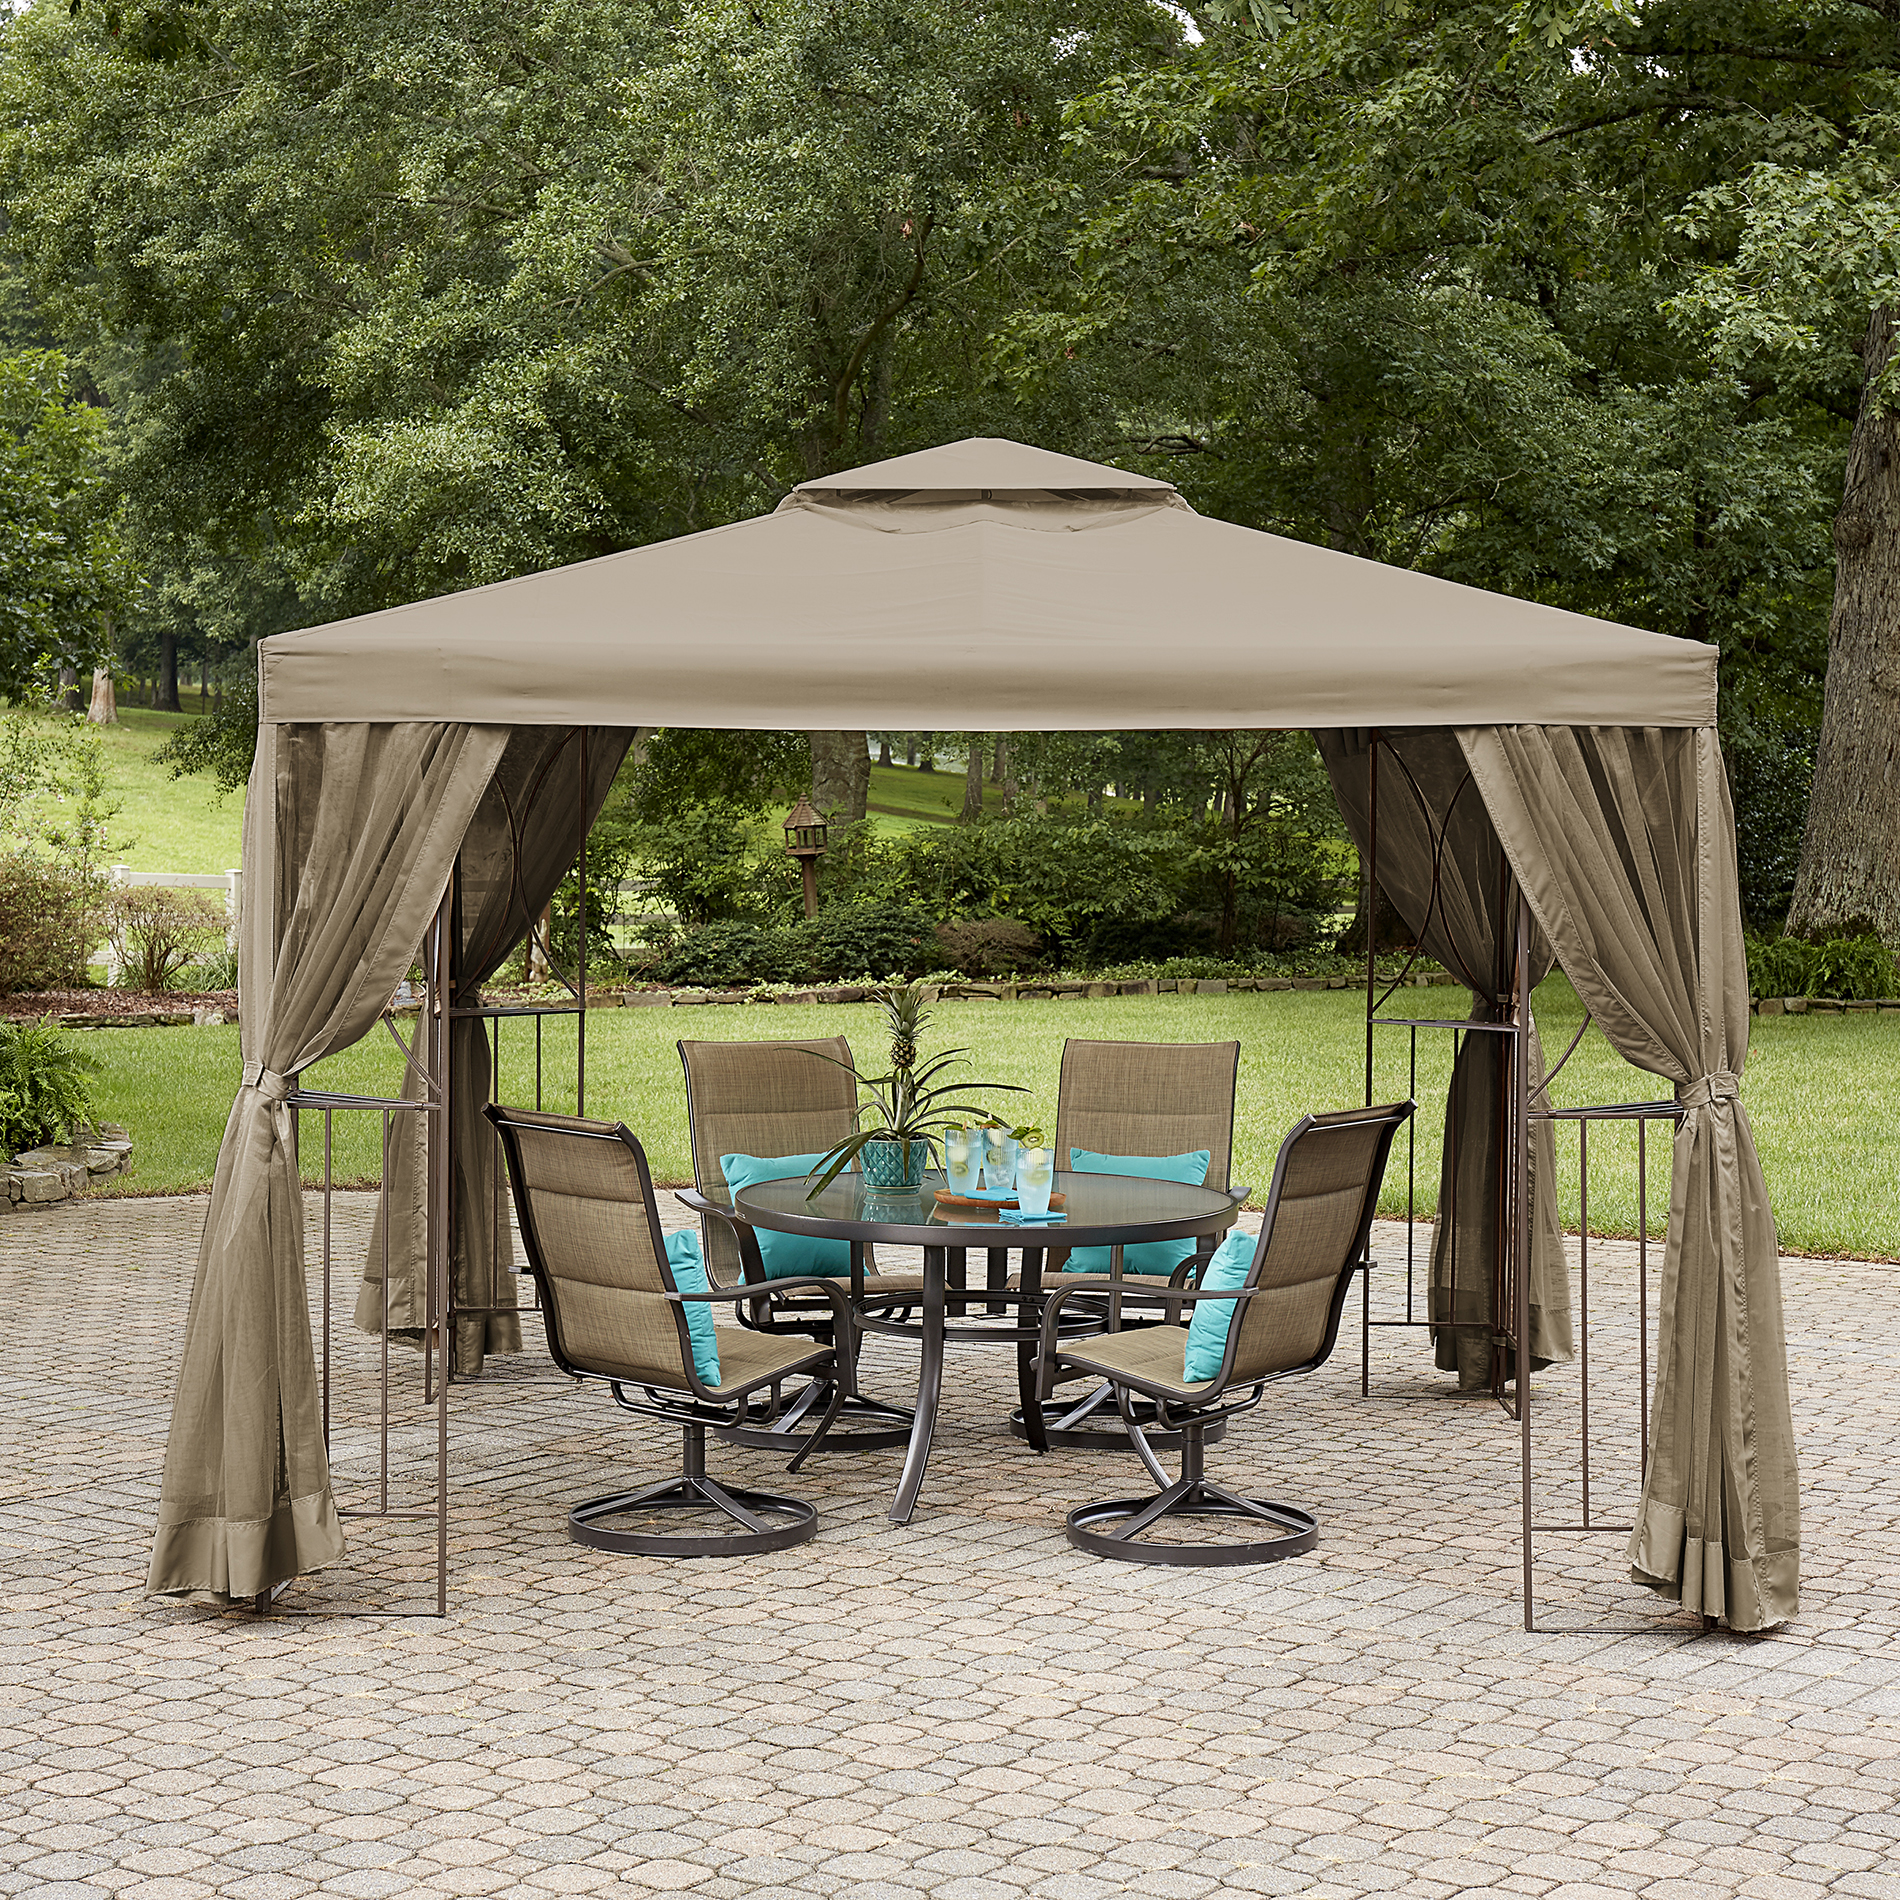  Garden  Oasis Lakeville 10 x 10 Canopy  Gazebo  with Insect 